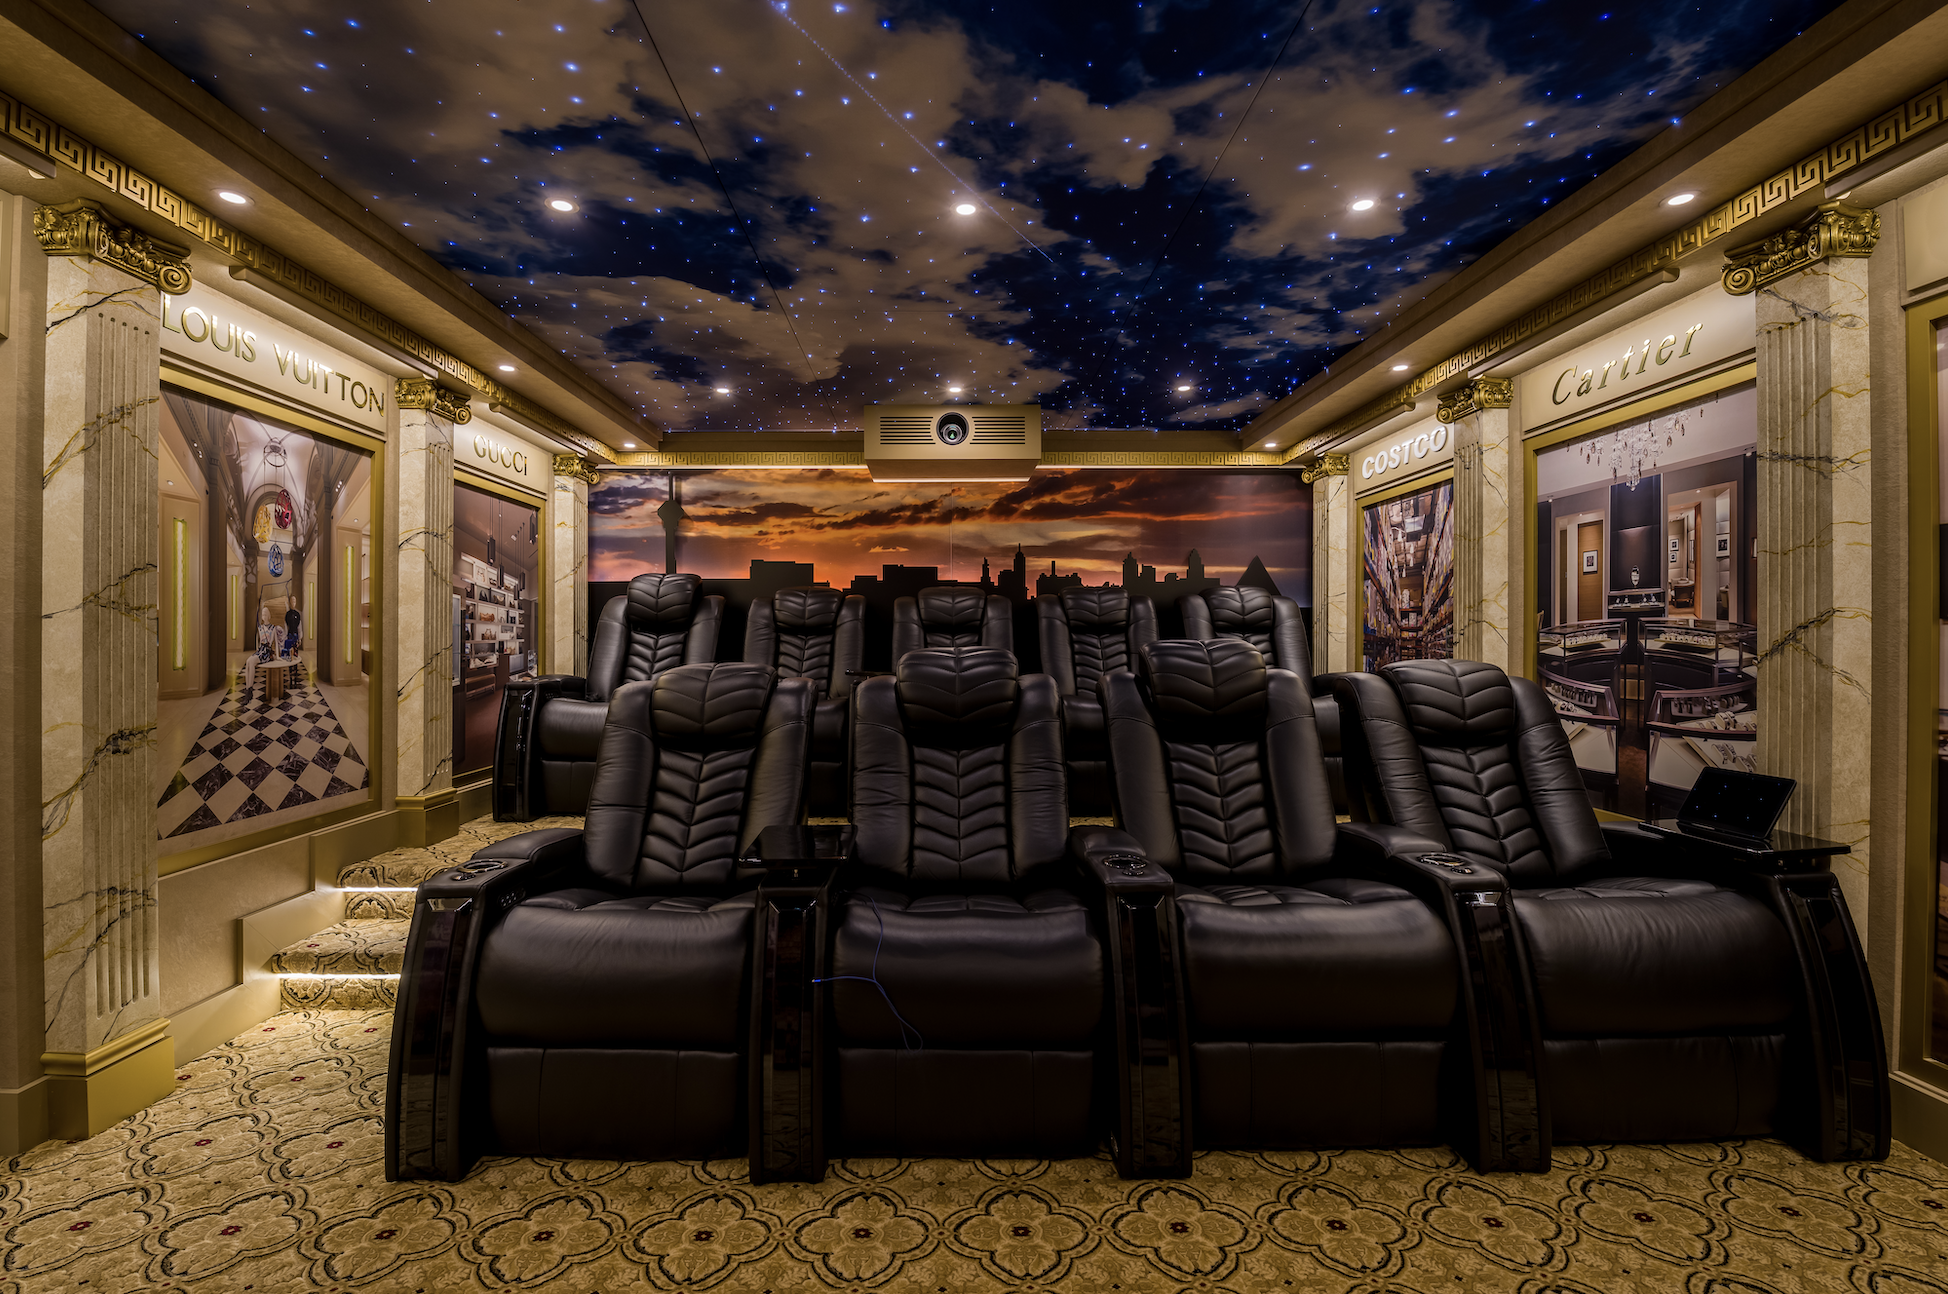 Las Vegas Theme Home Theater by Digital Installers South Bay Klipsch Speakers